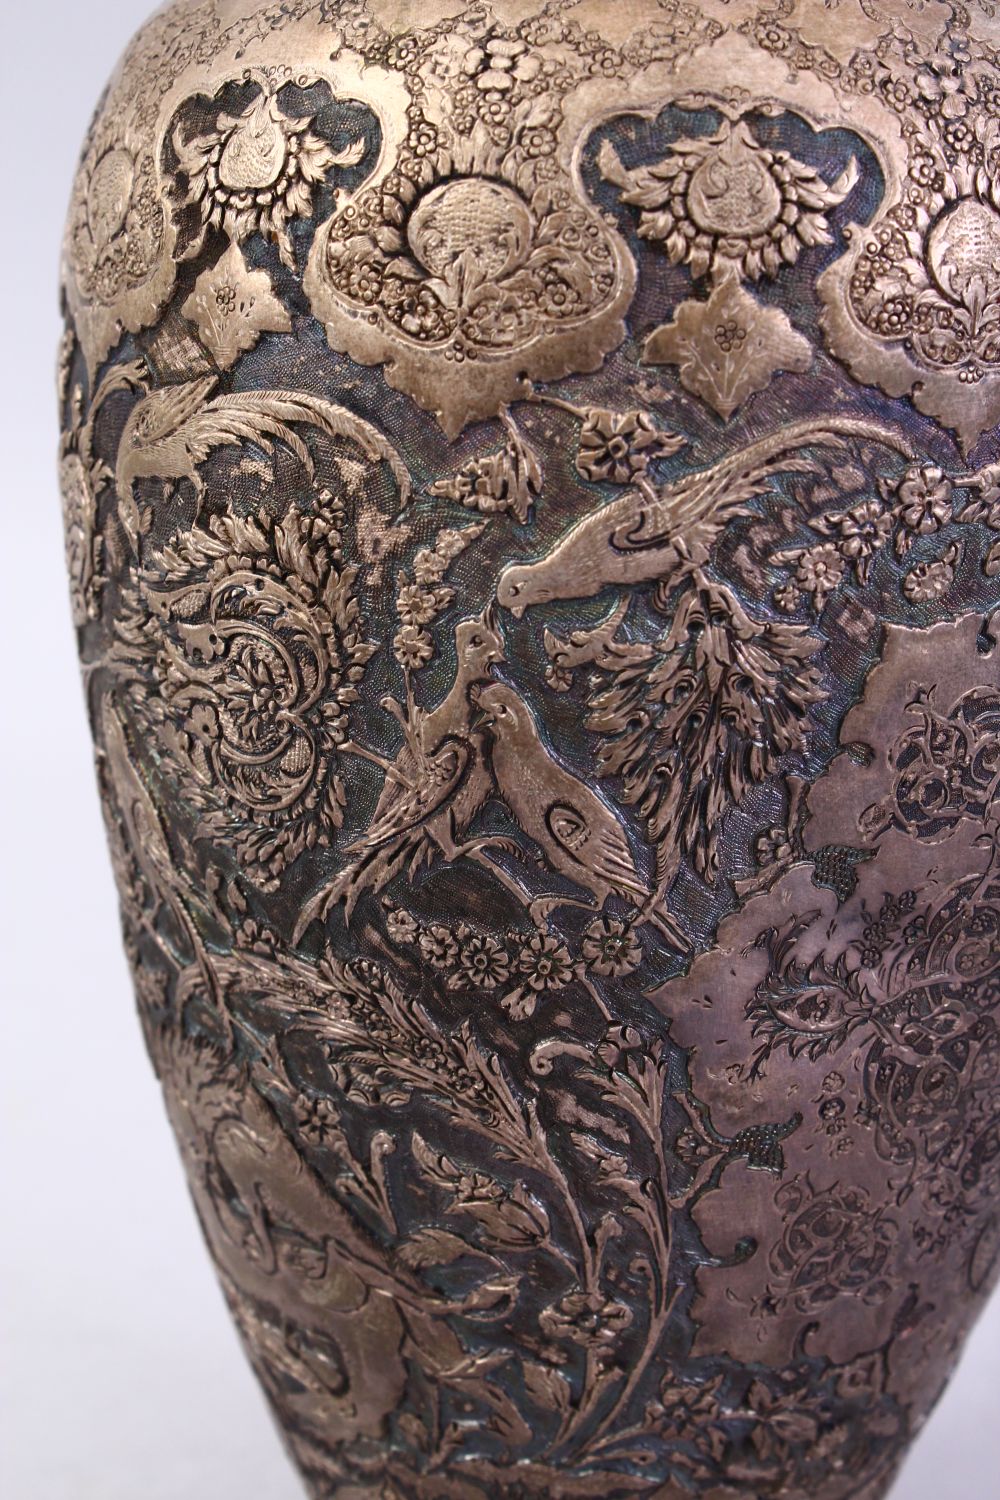 A 18TH / 19TH CENTURY IRANIAN CARVED SILVER VASE, with a multitude of decoration depicting flora and - Image 7 of 12